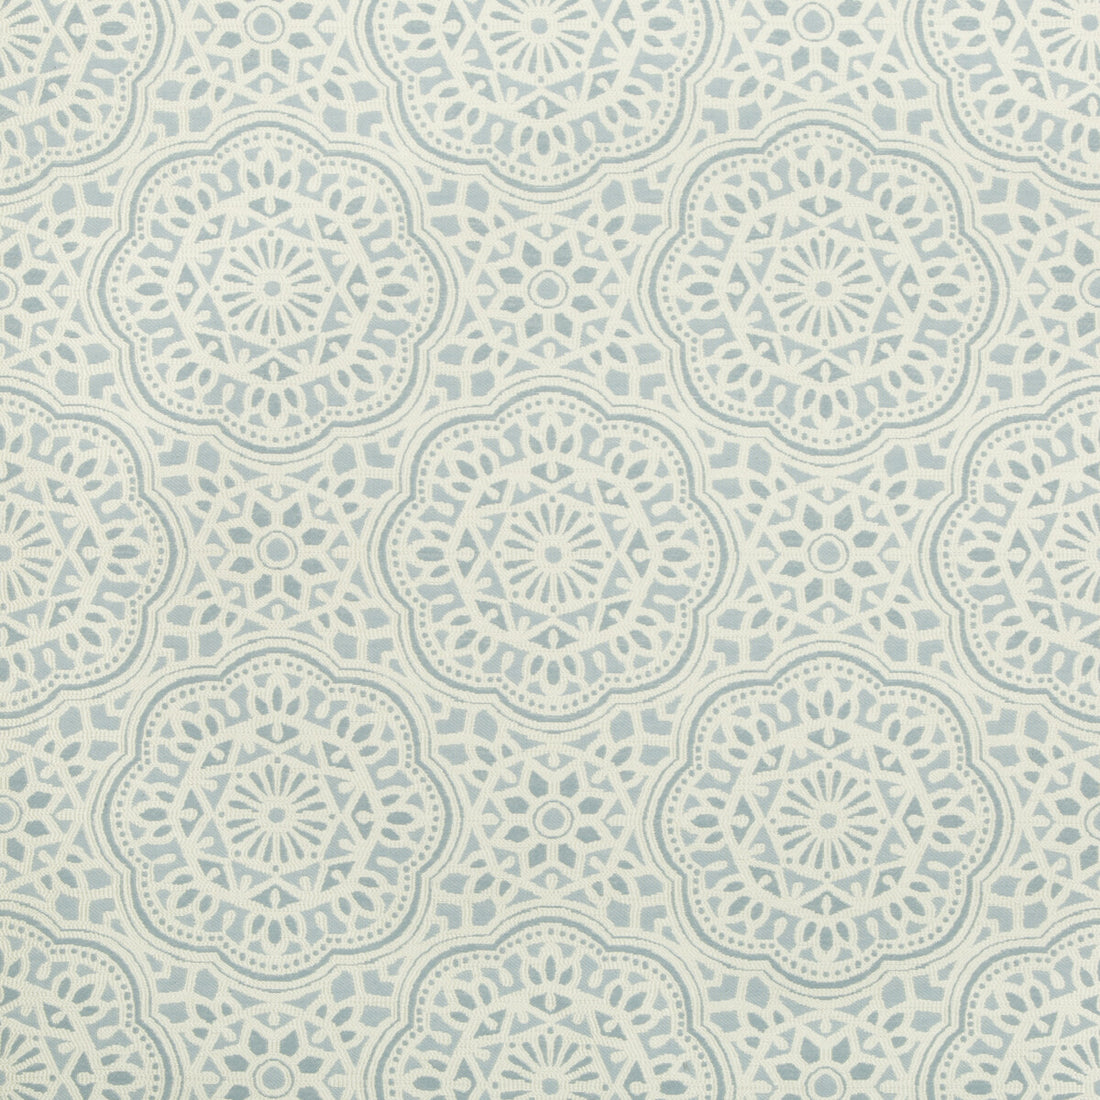 Kravet Contract fabric in 34769-1615 color - pattern 34769.1615.0 - by Kravet Contract in the Gis collection